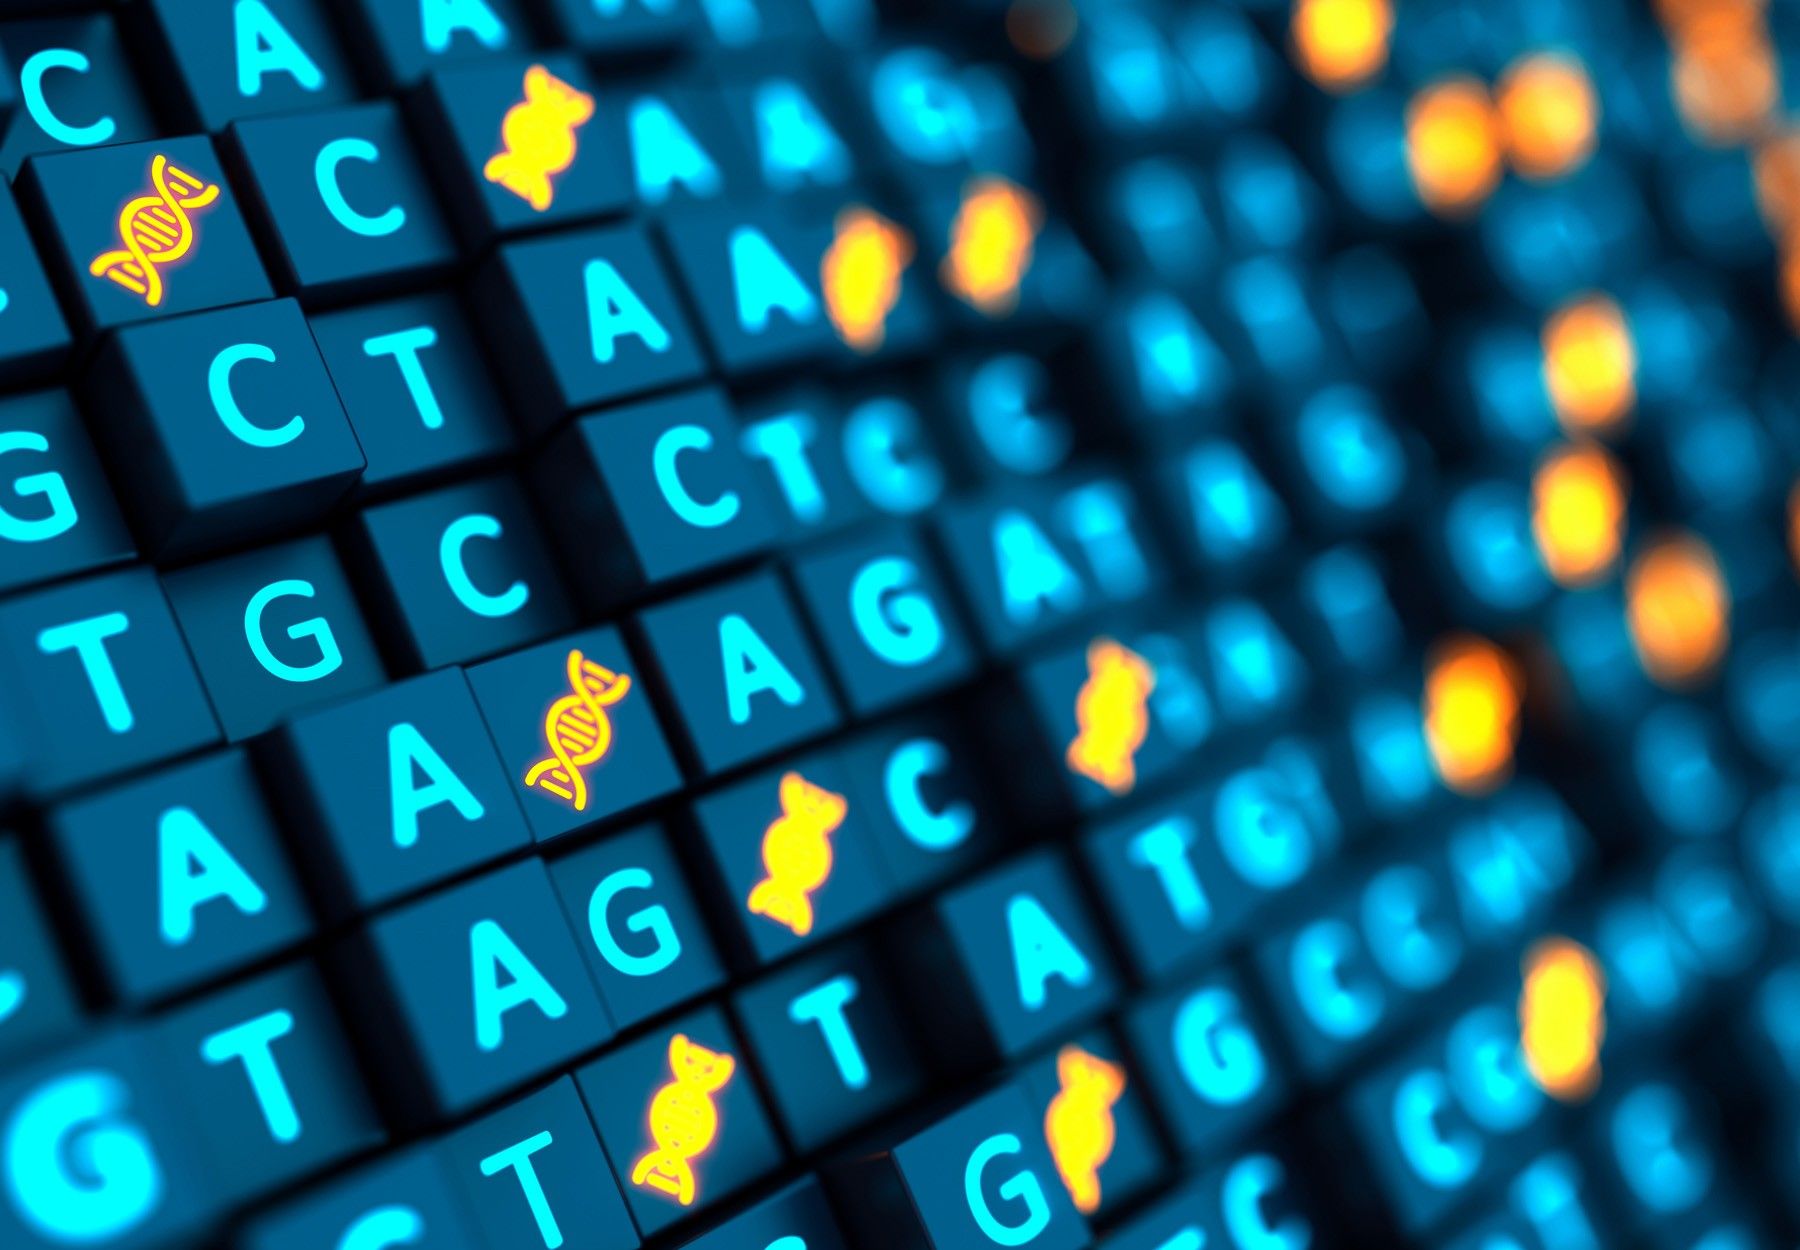 Futuristic 3d cubes background with DNA sequencing ACGT and double helix stock illustration